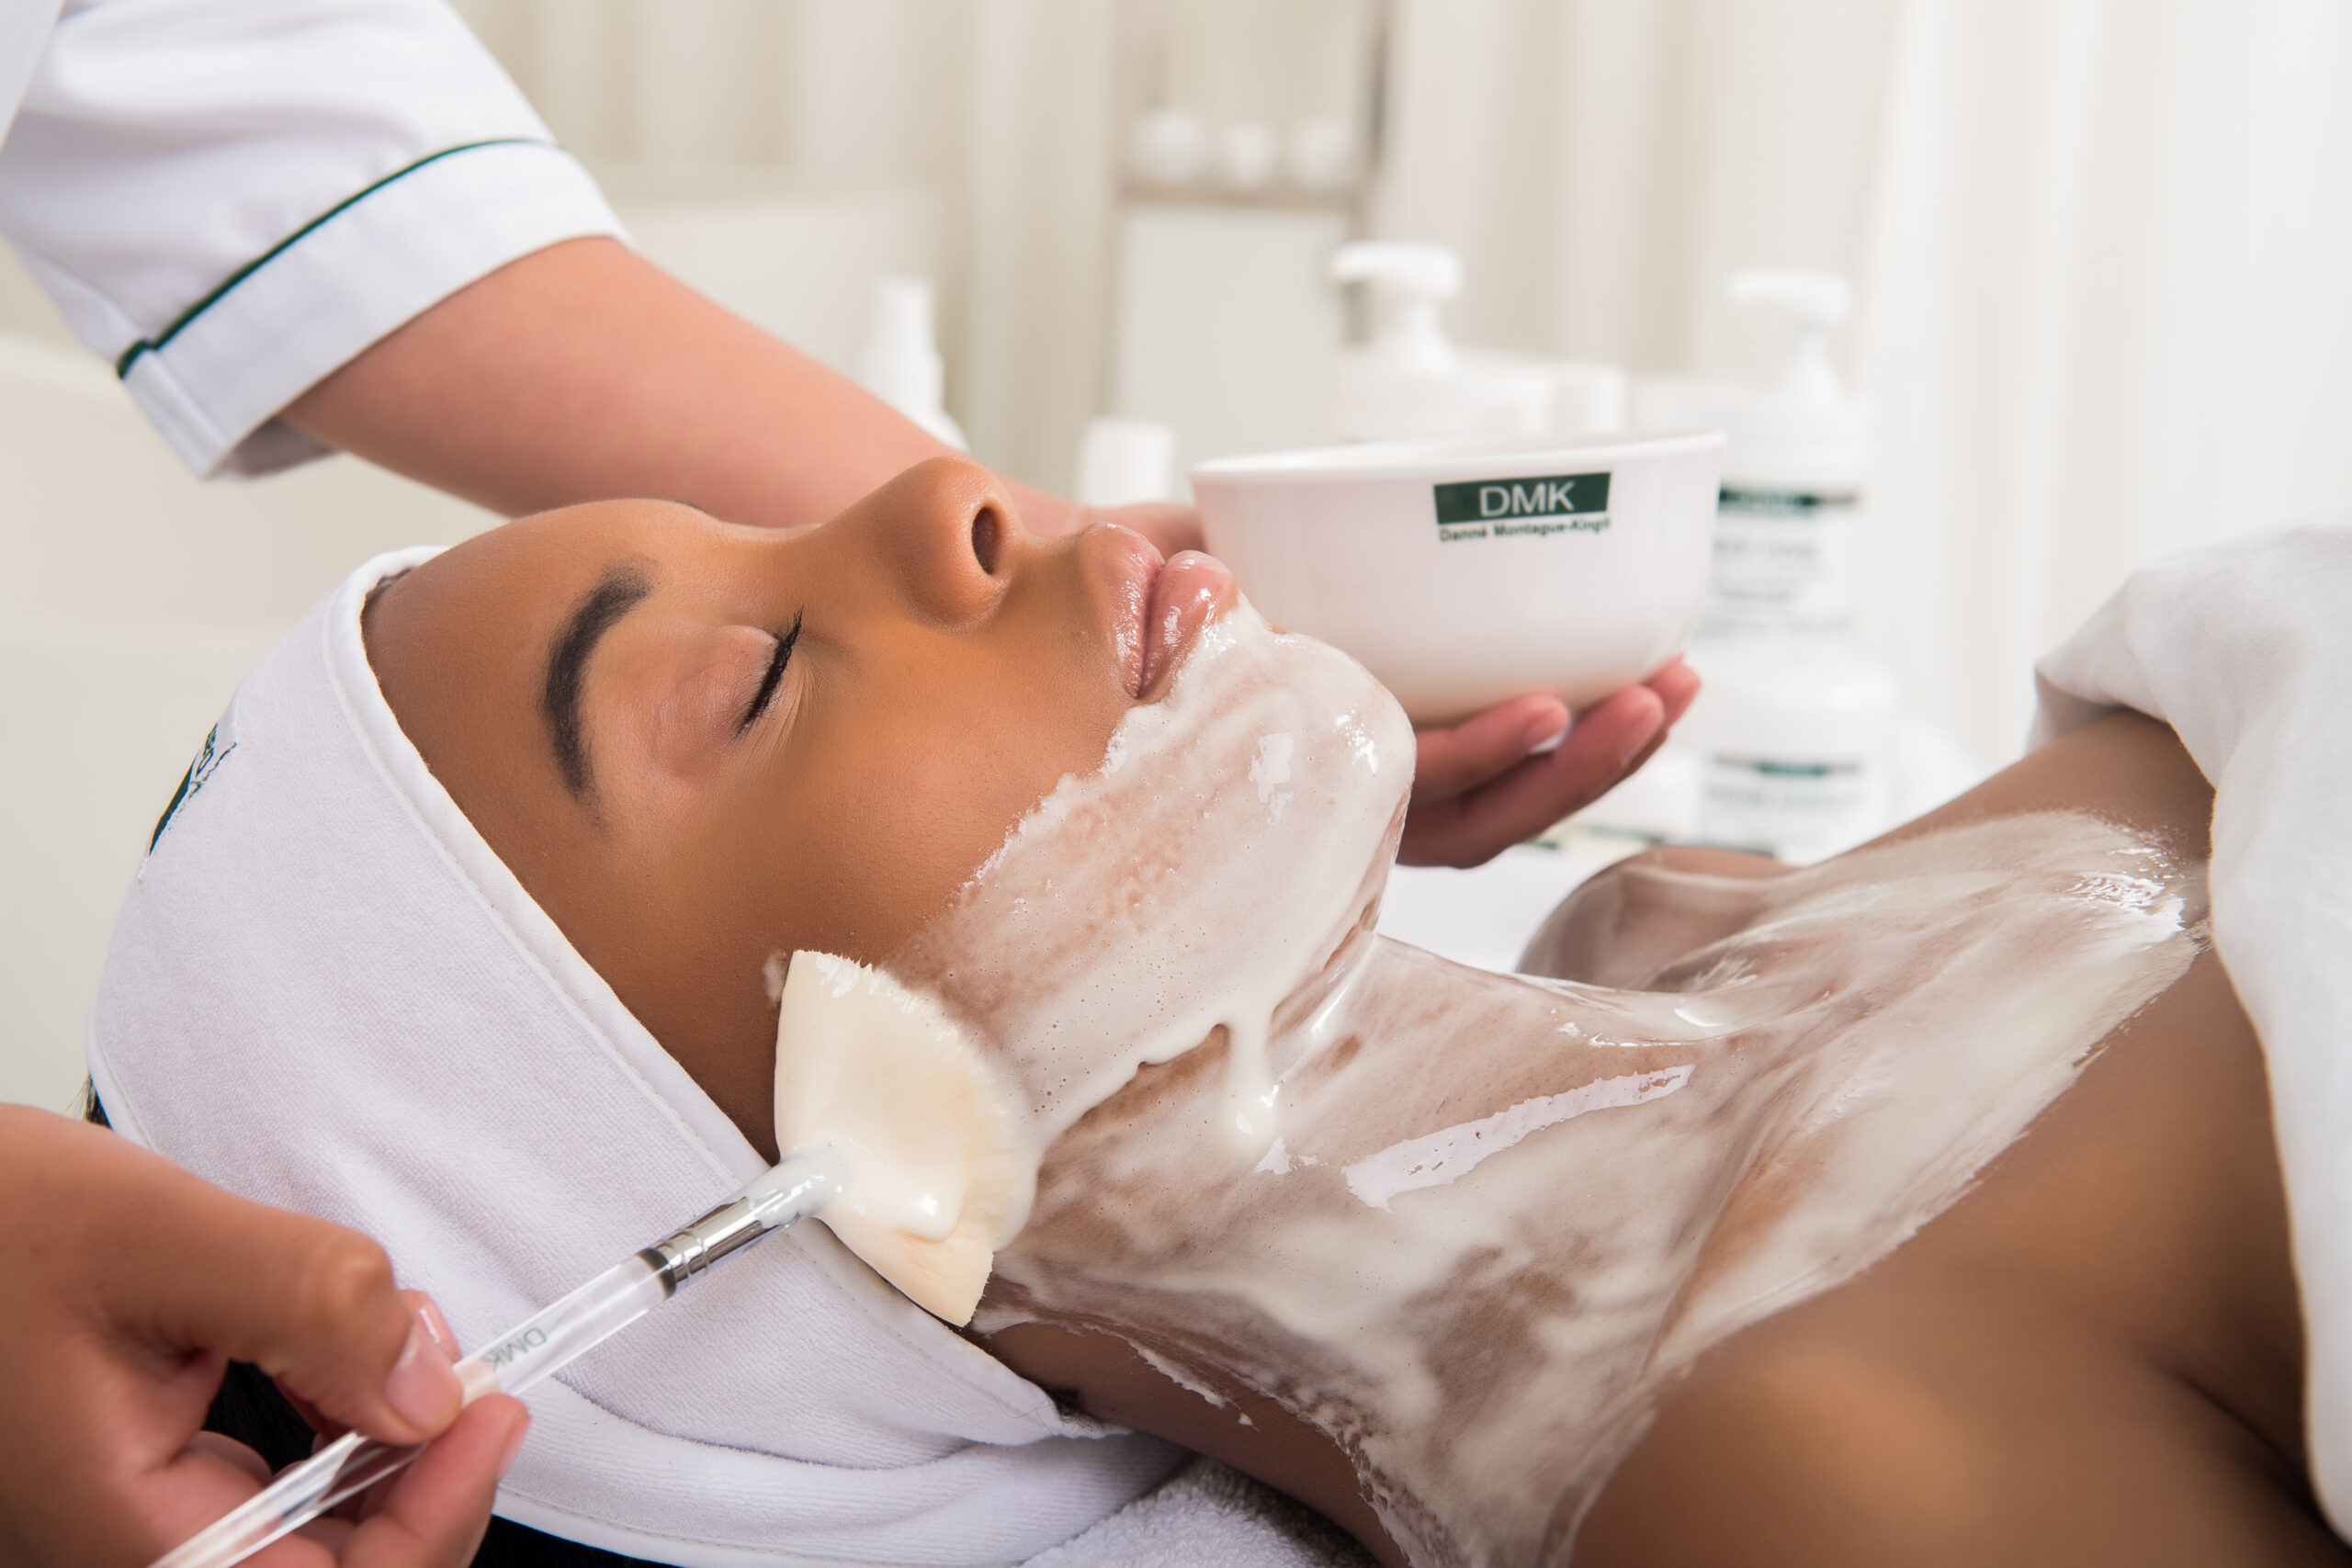 DMK Nutrition Treatment for Post Winter Skin Recovery